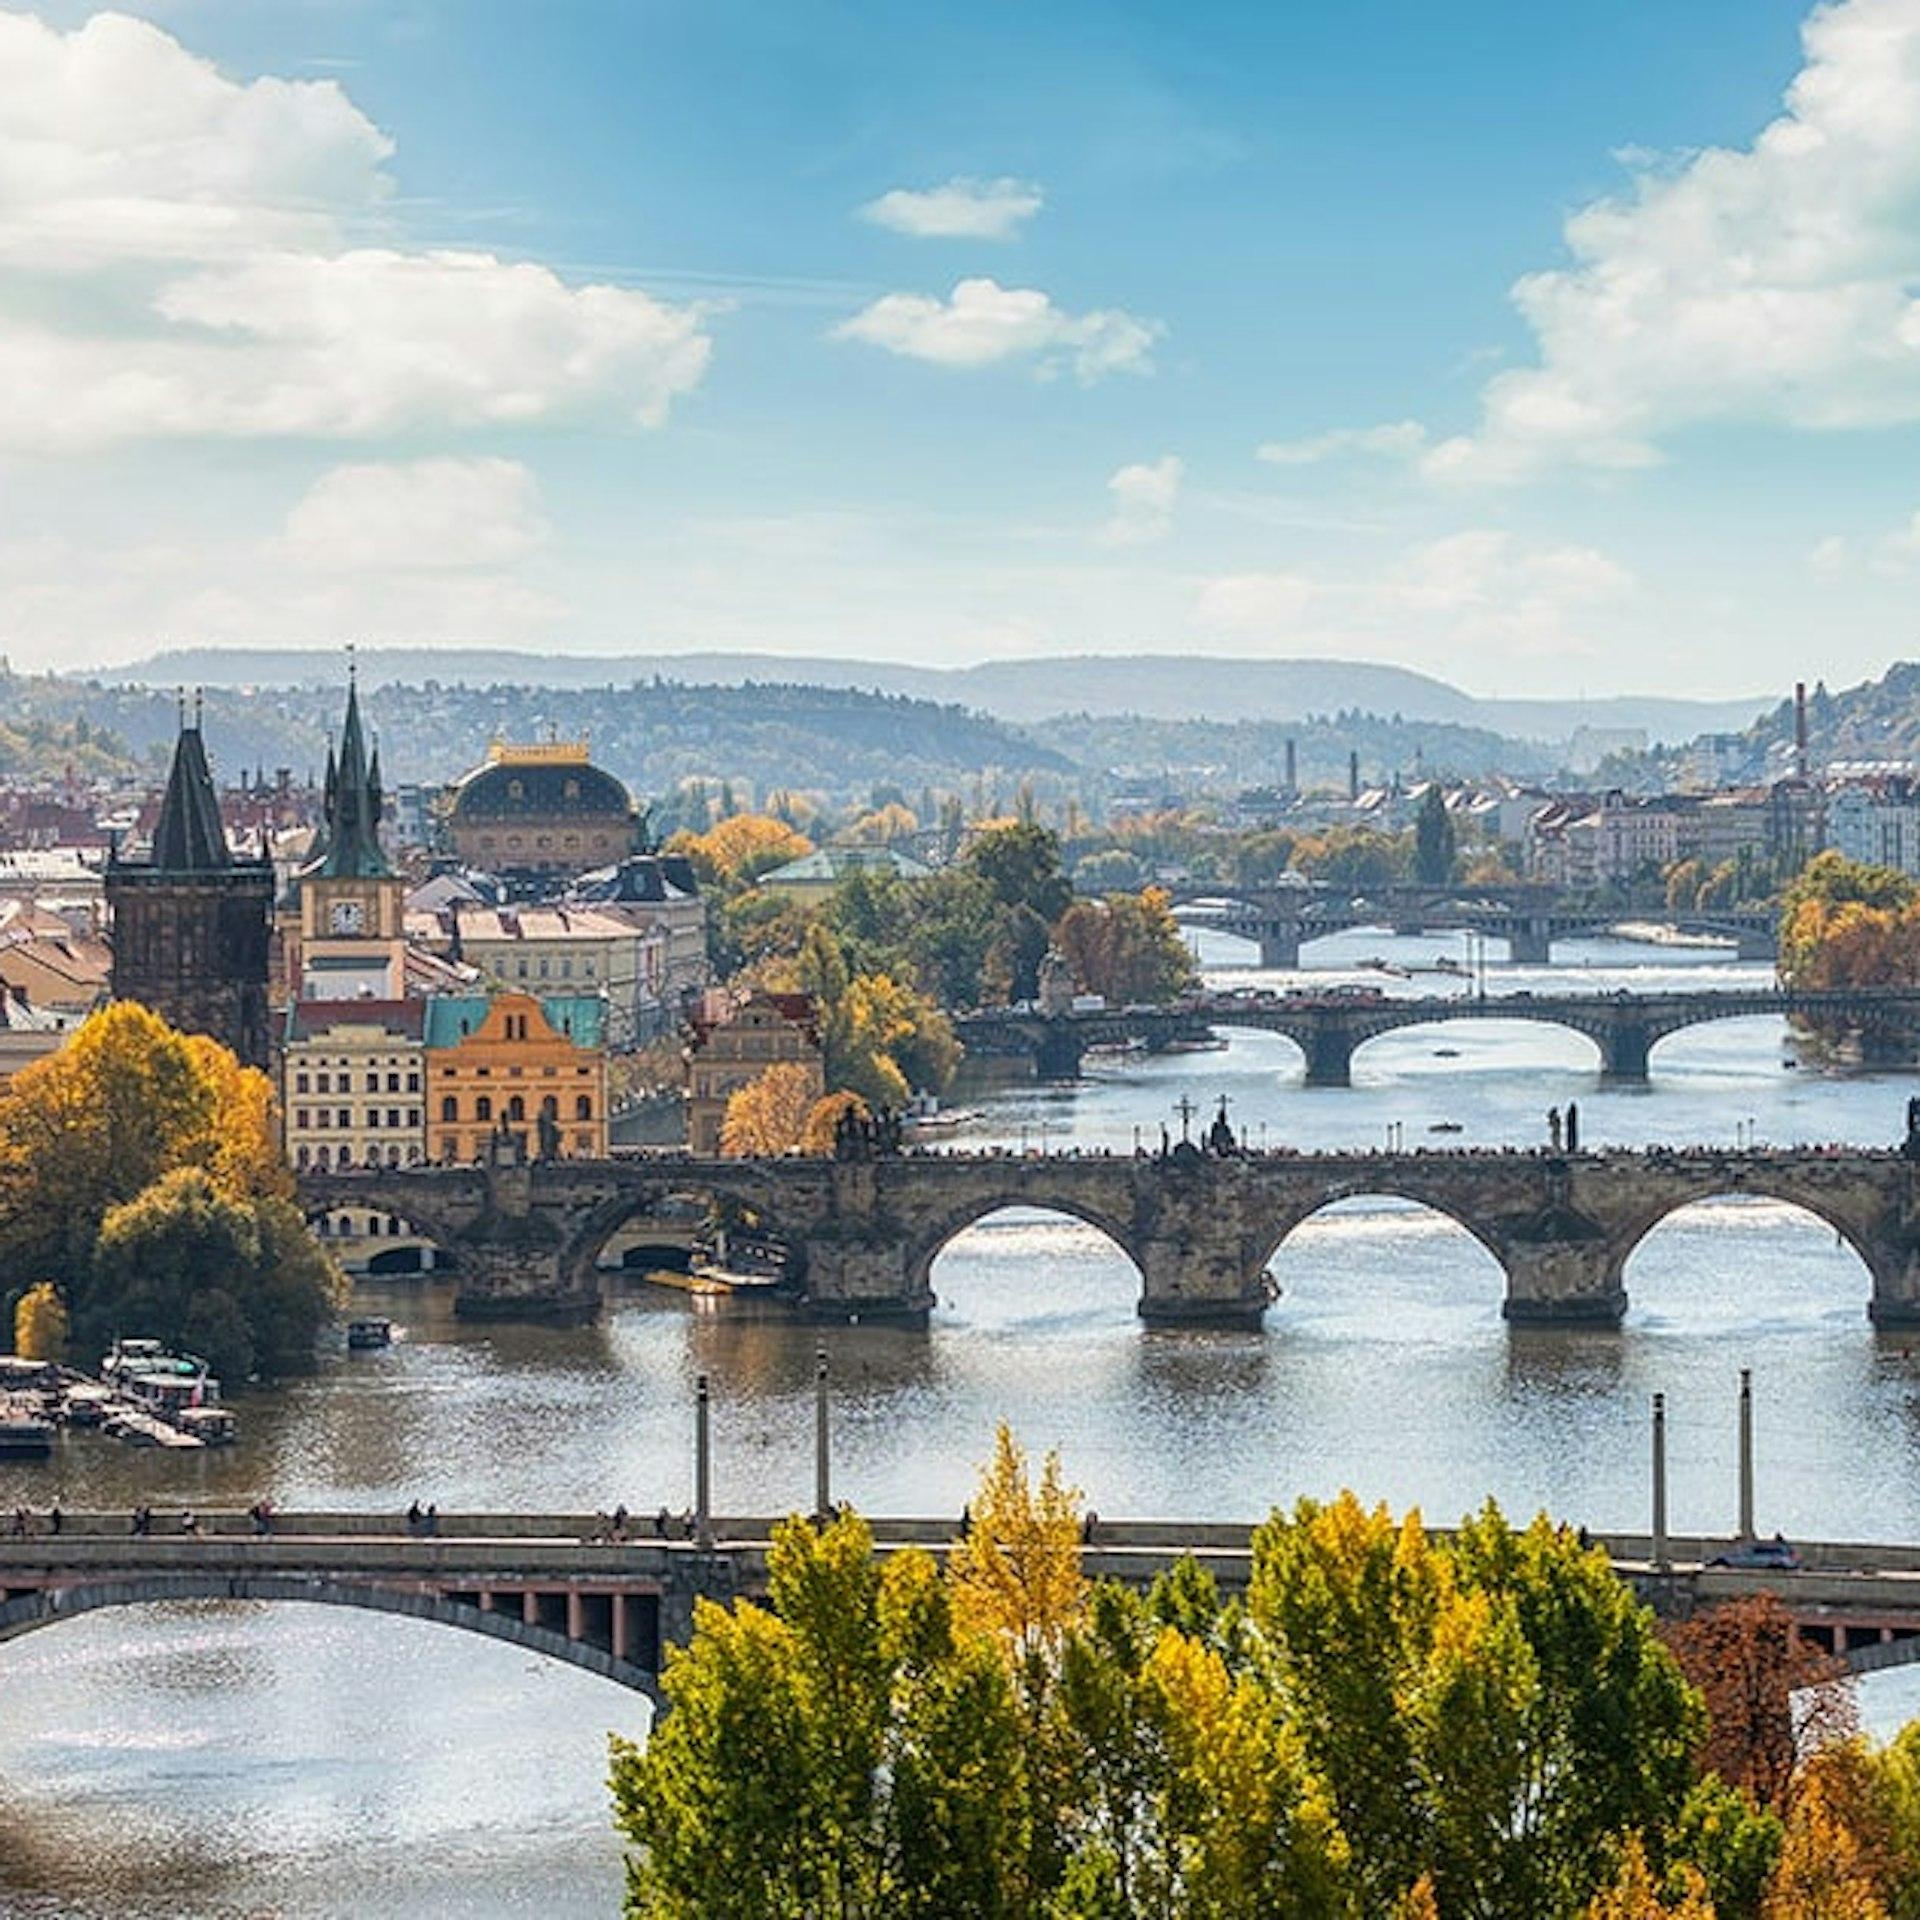 Get the latest news and updates on e-invoicing, e-ordering, e-archiving and indirect tax regulatory requirements for Czech Republic.